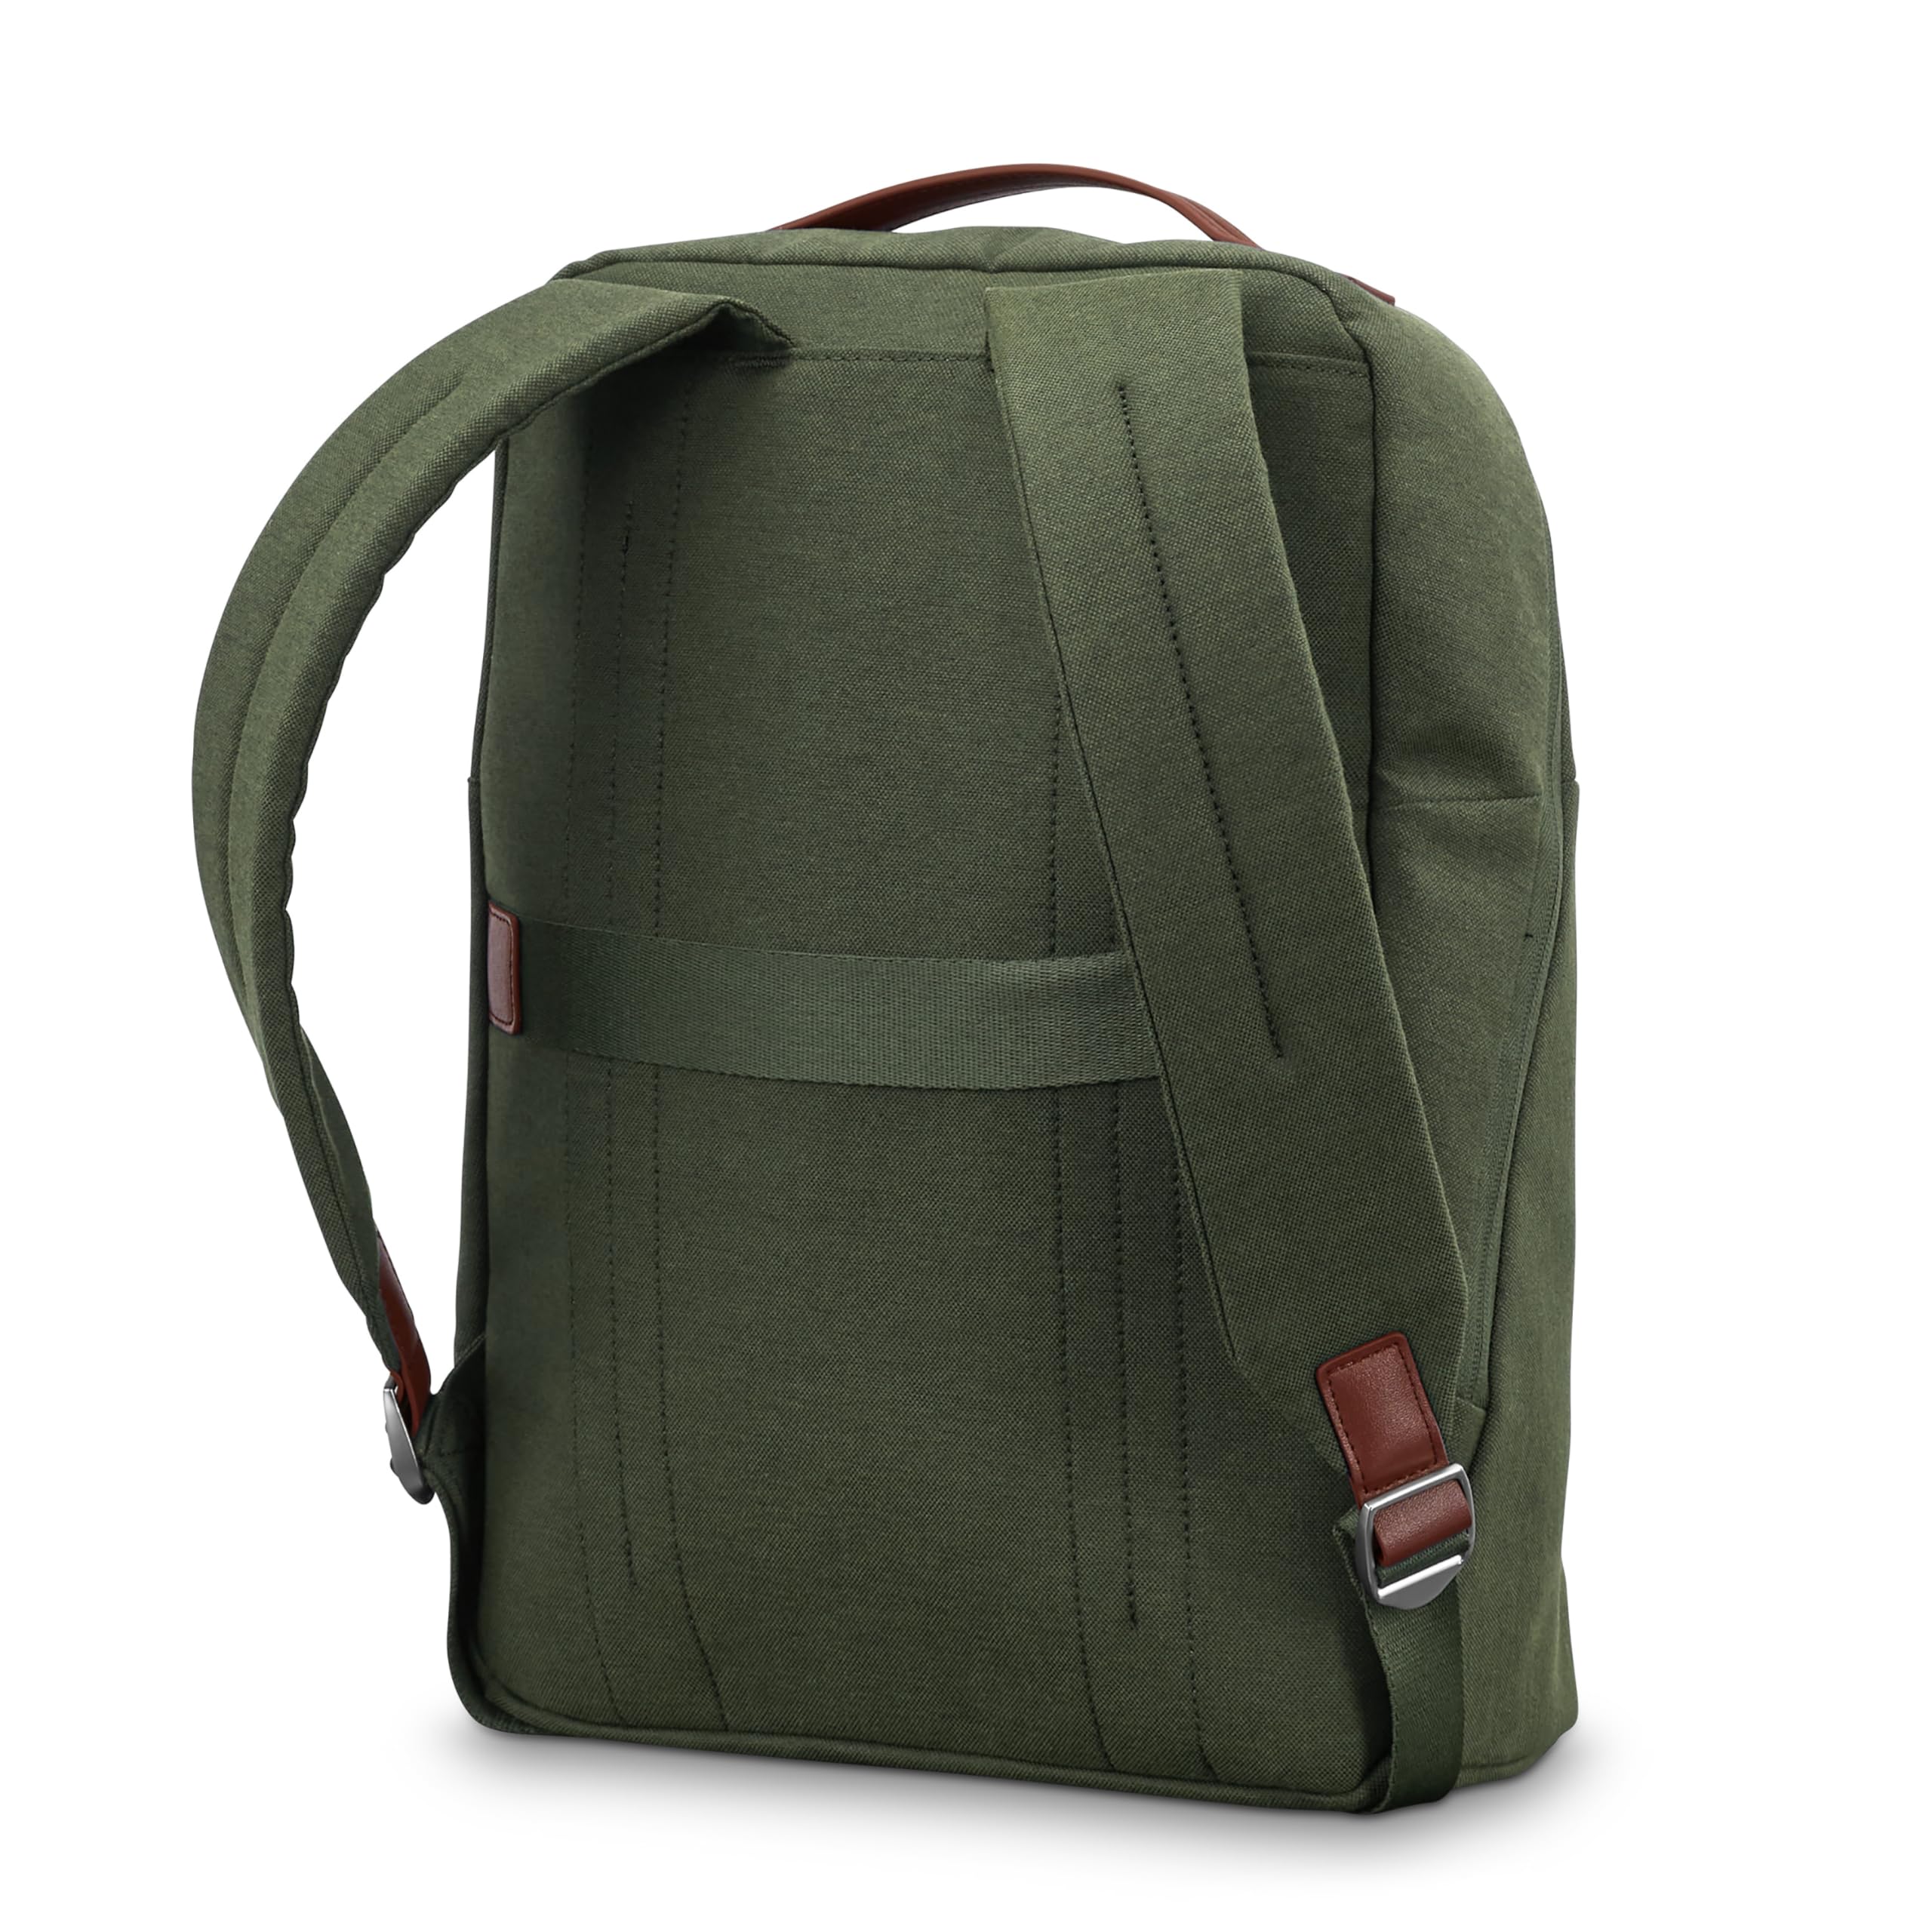 Samsonite Virtuosa Carry-On Travel Backpack with Padded Laptop Sleeve, Pine Green